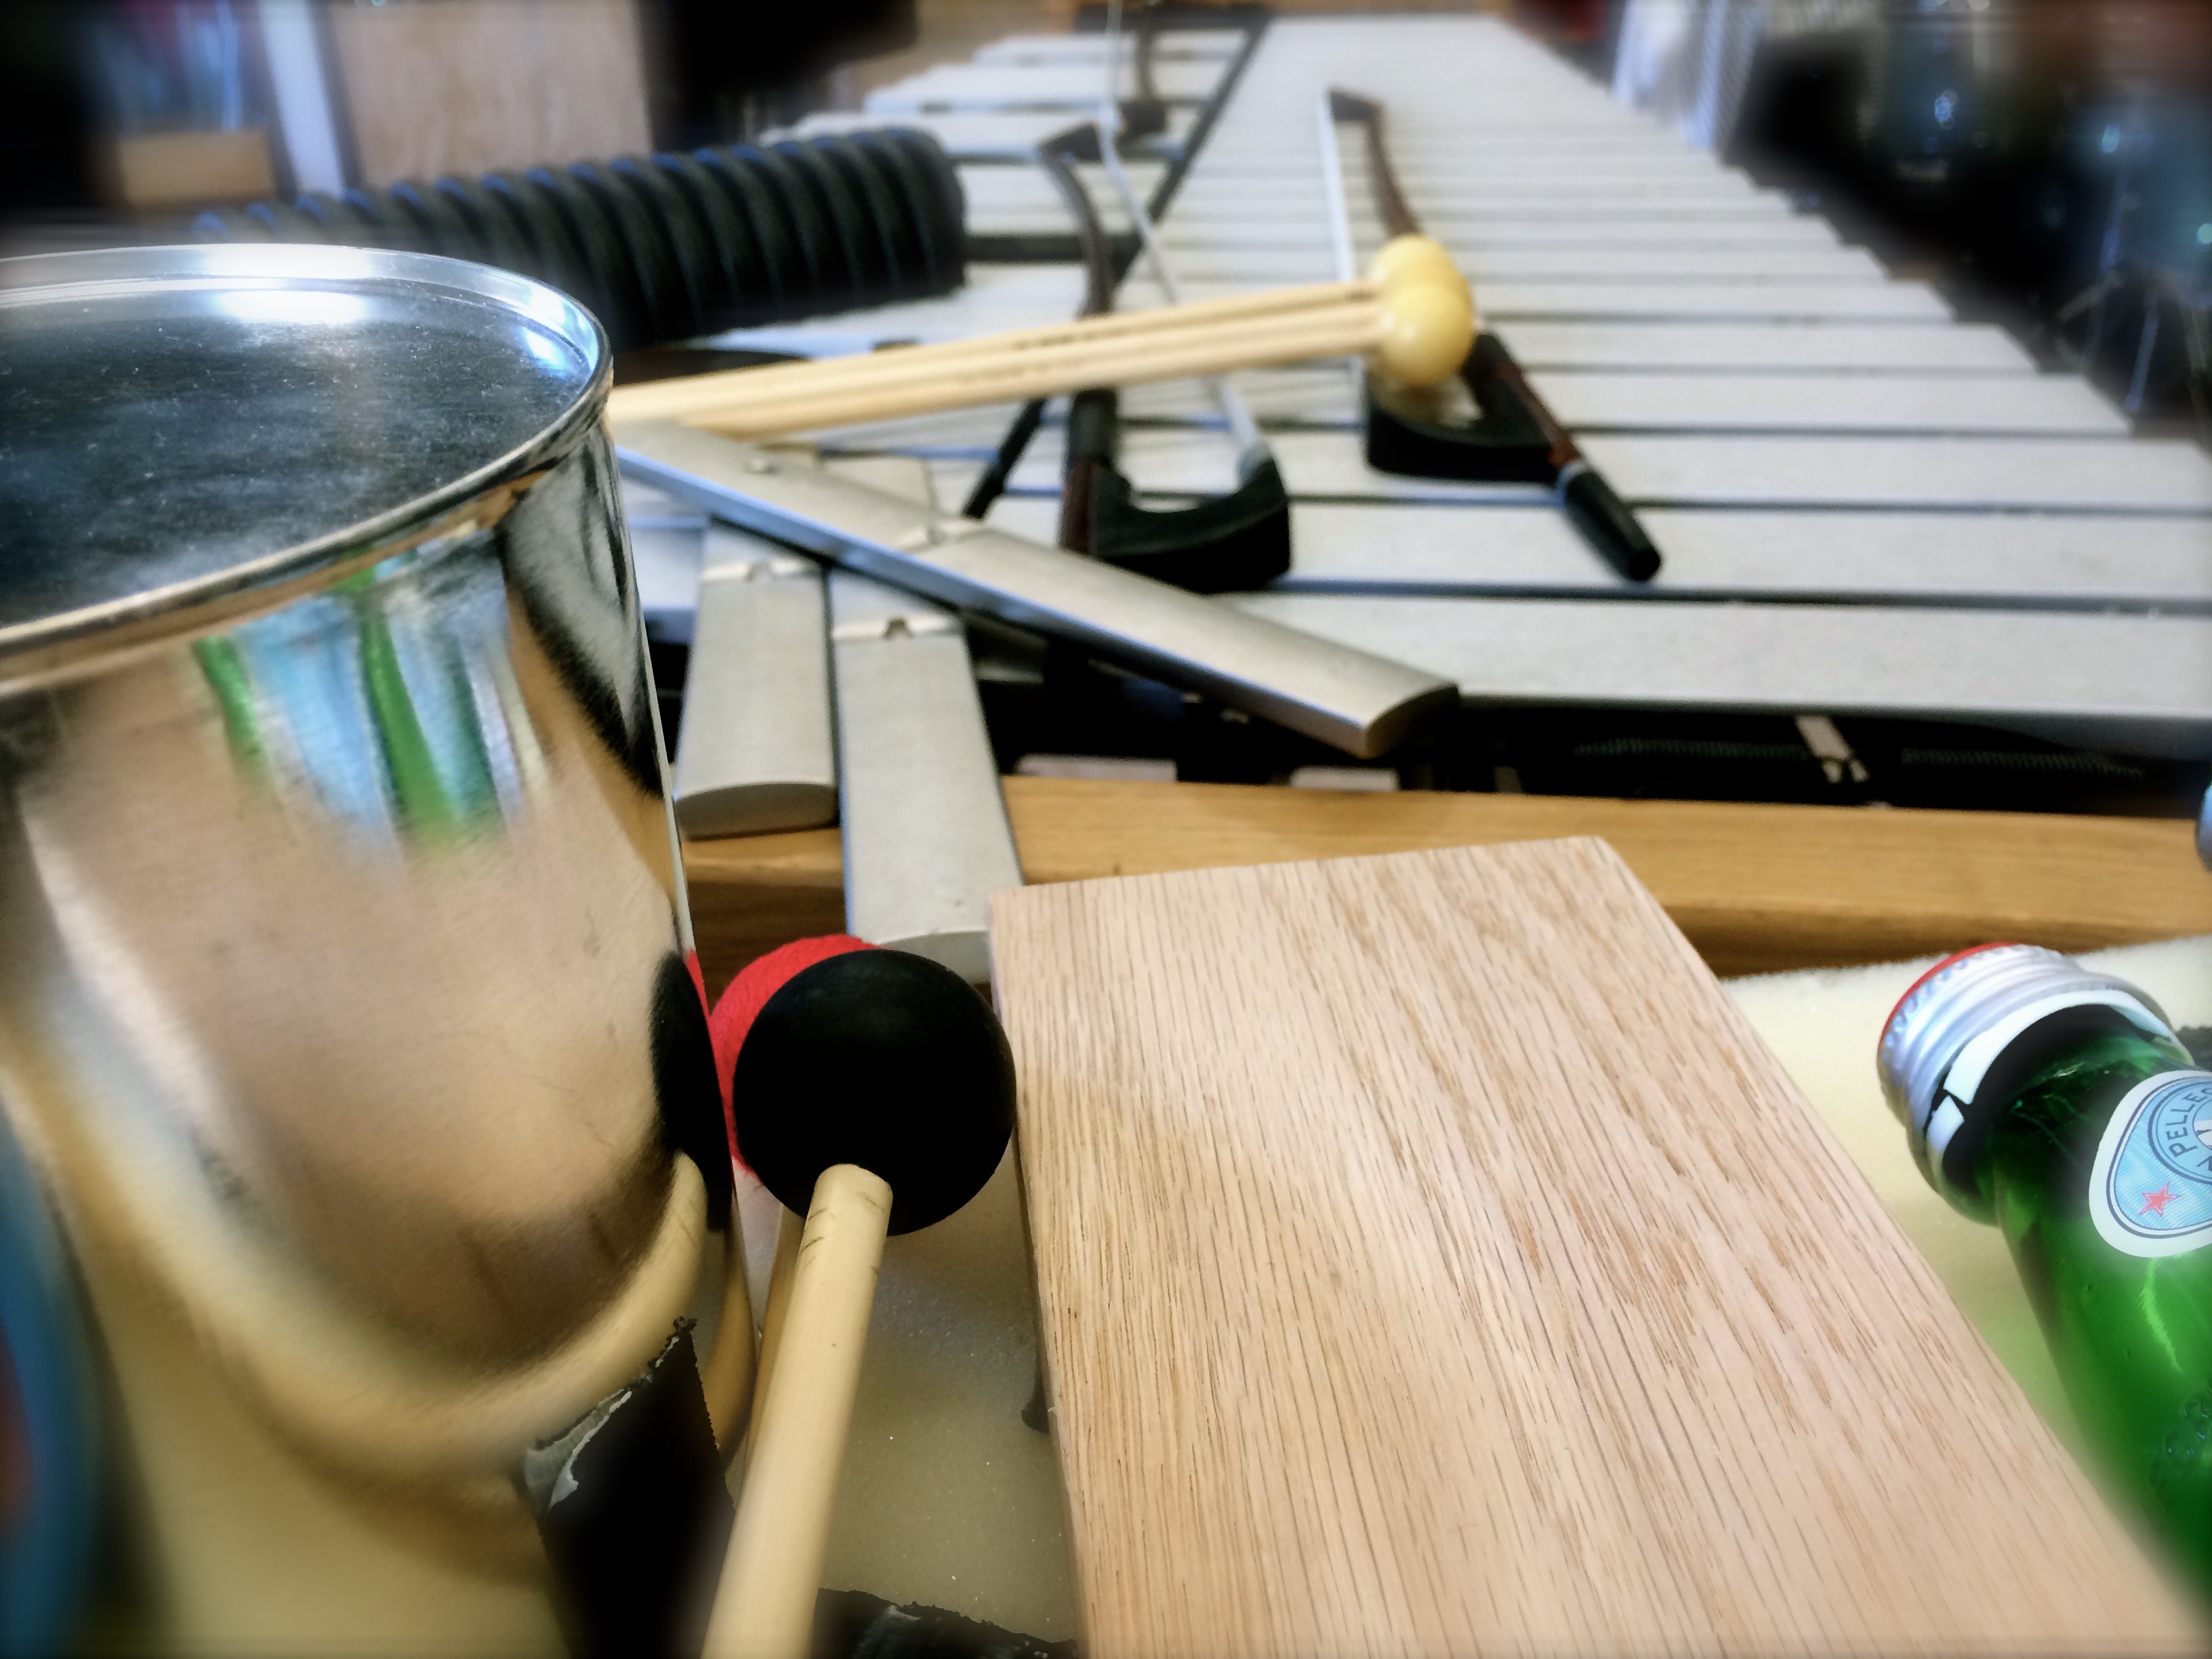 Conservatory Sundays: Bard Percussion and So Percussion